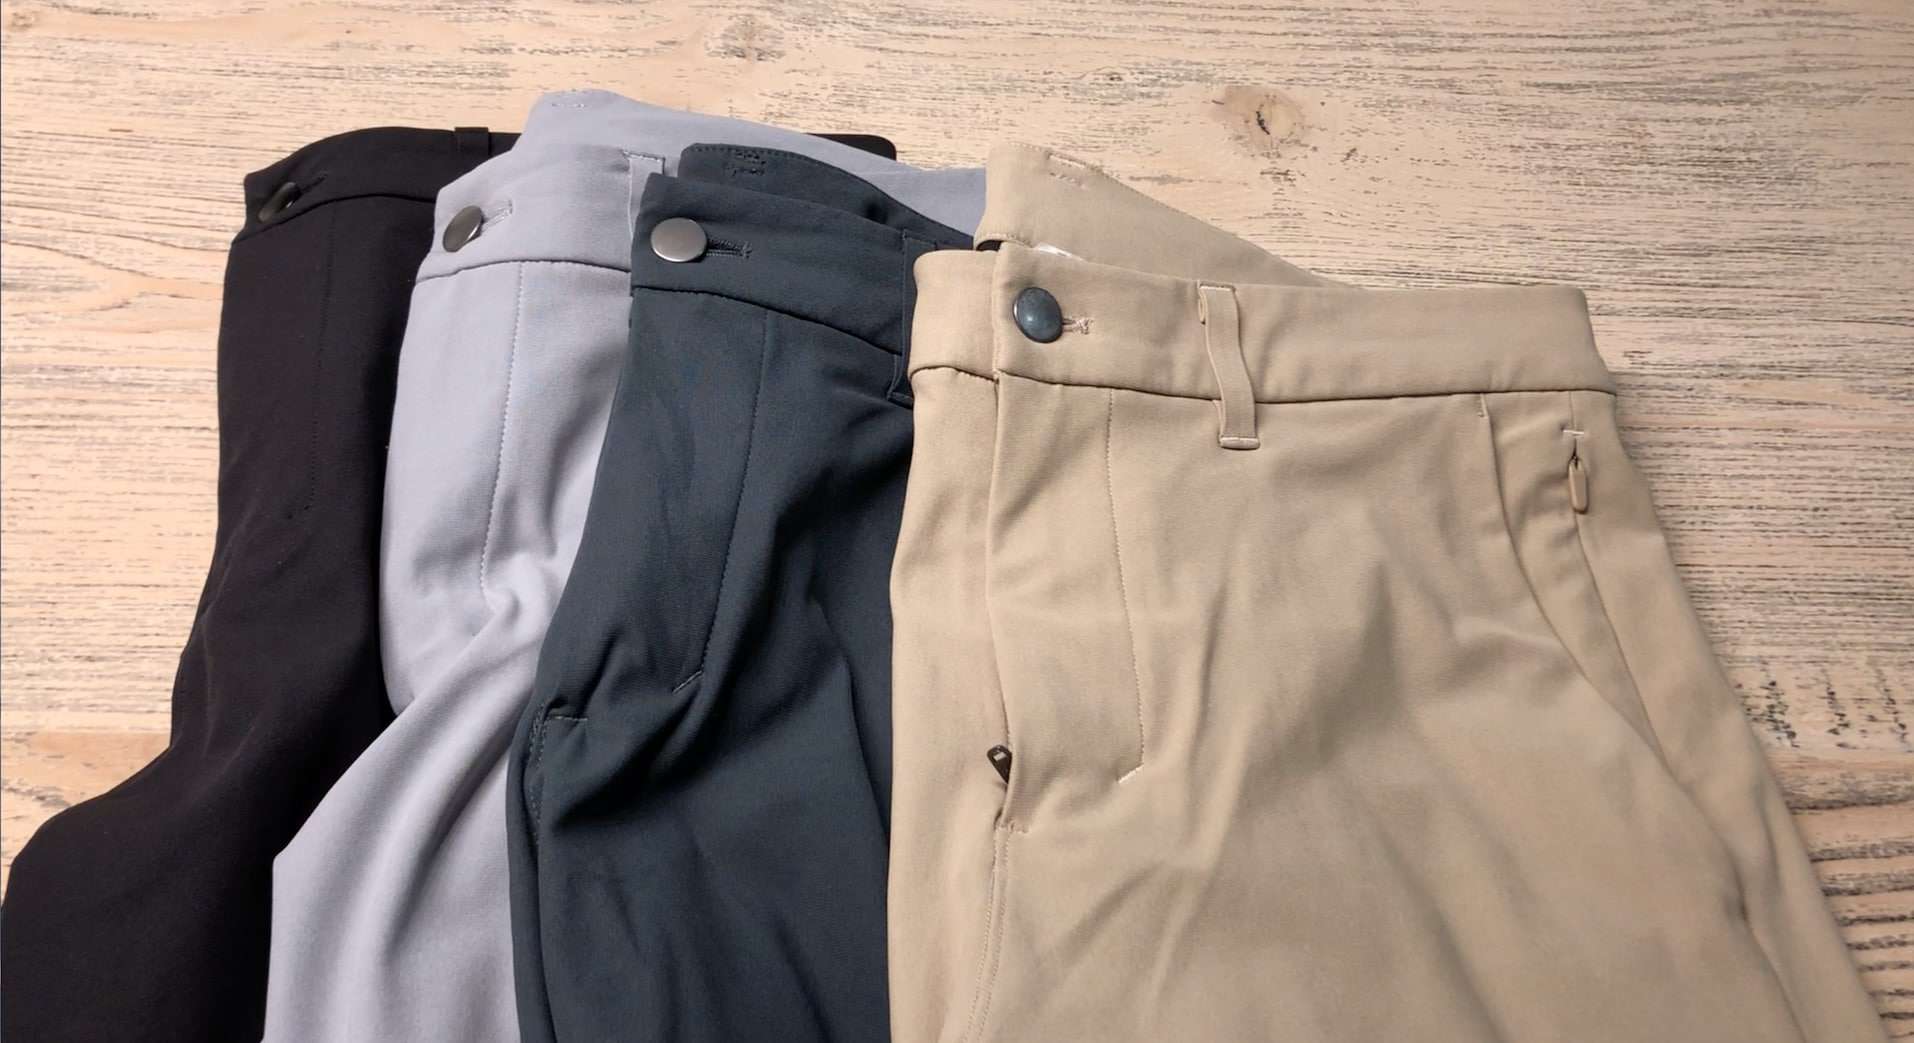 ABC Pant Review: I have 4 colors in my closet